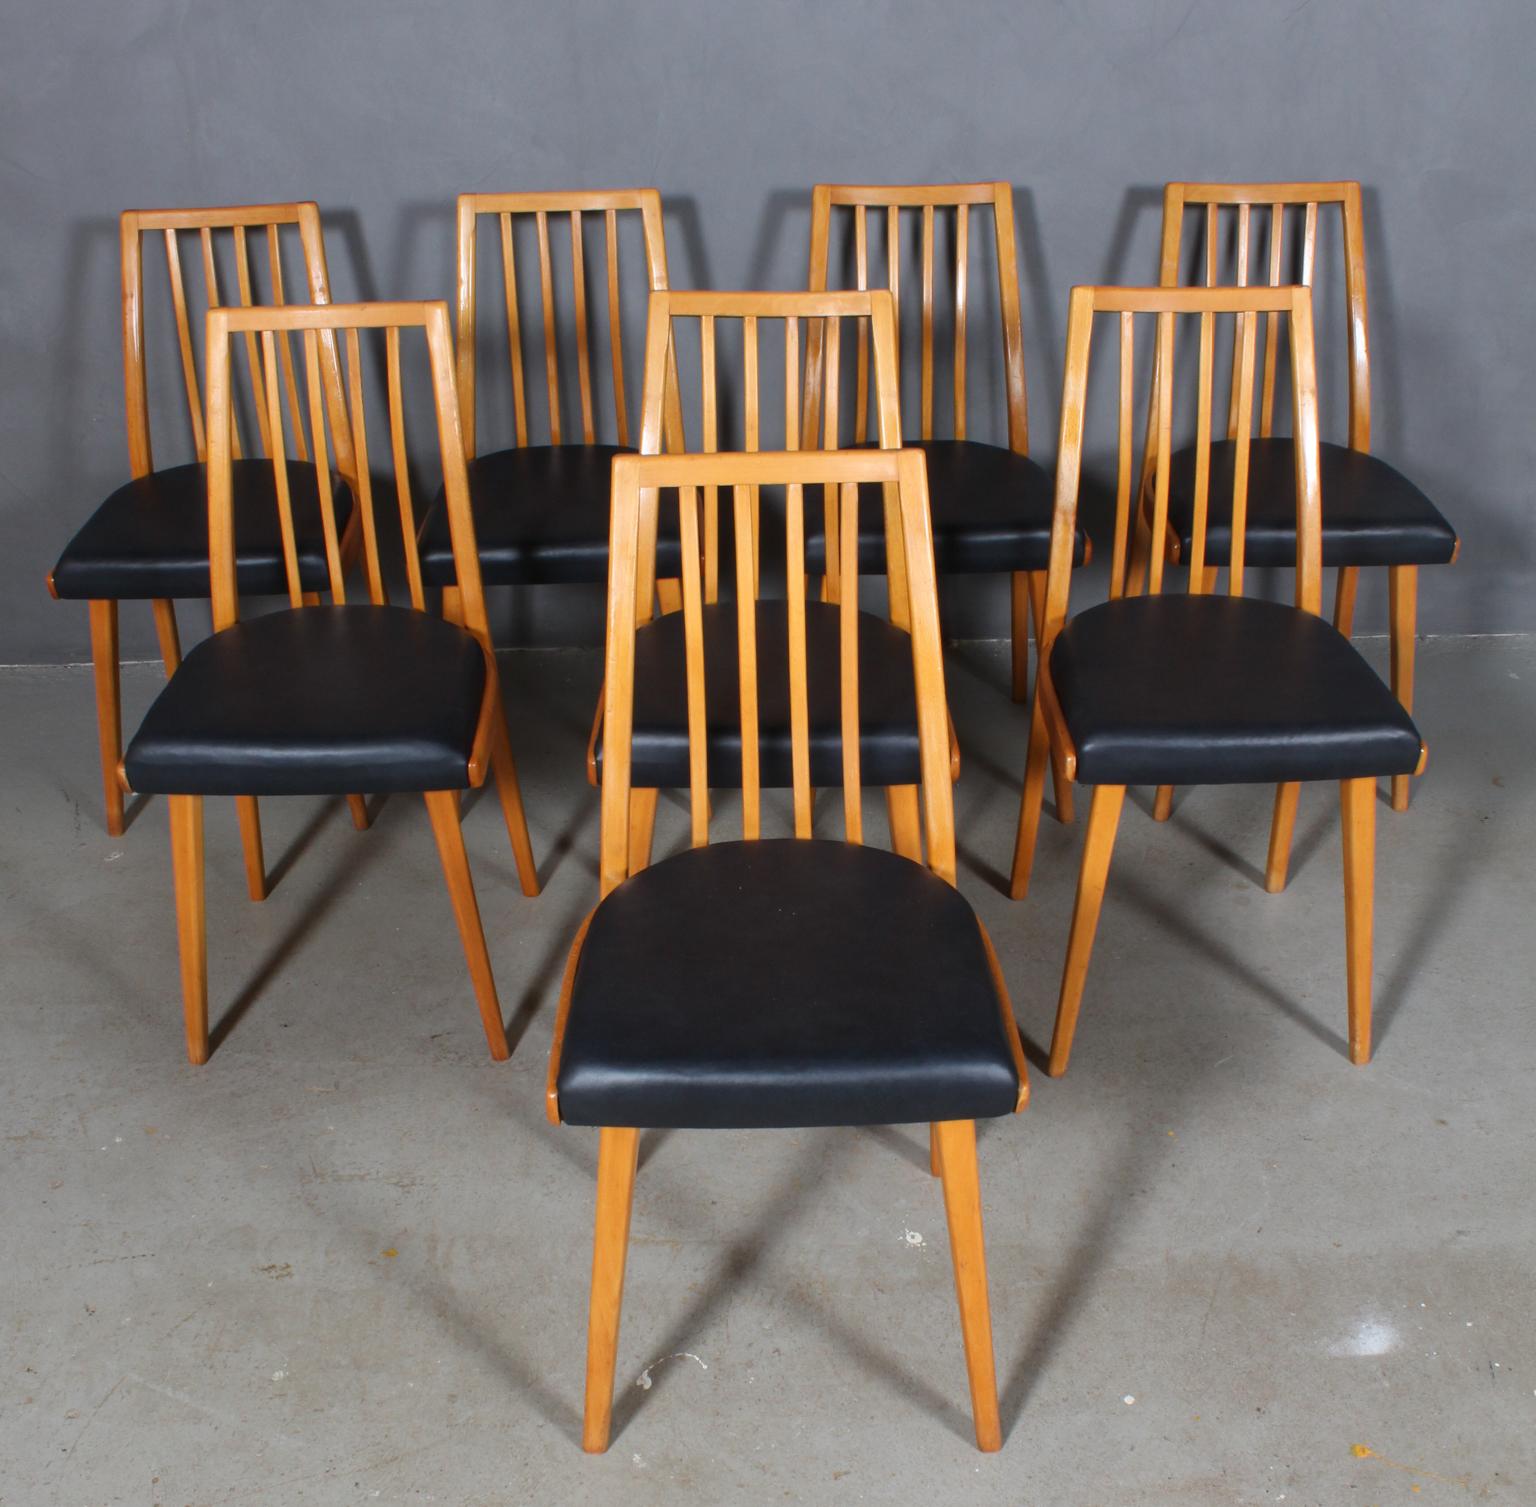 Set of eight Thonet (Ton) dining chairs new upholstered with black aniline leather.

Frame of solid beech.

Made in the 1940s by Thonet (Ton).